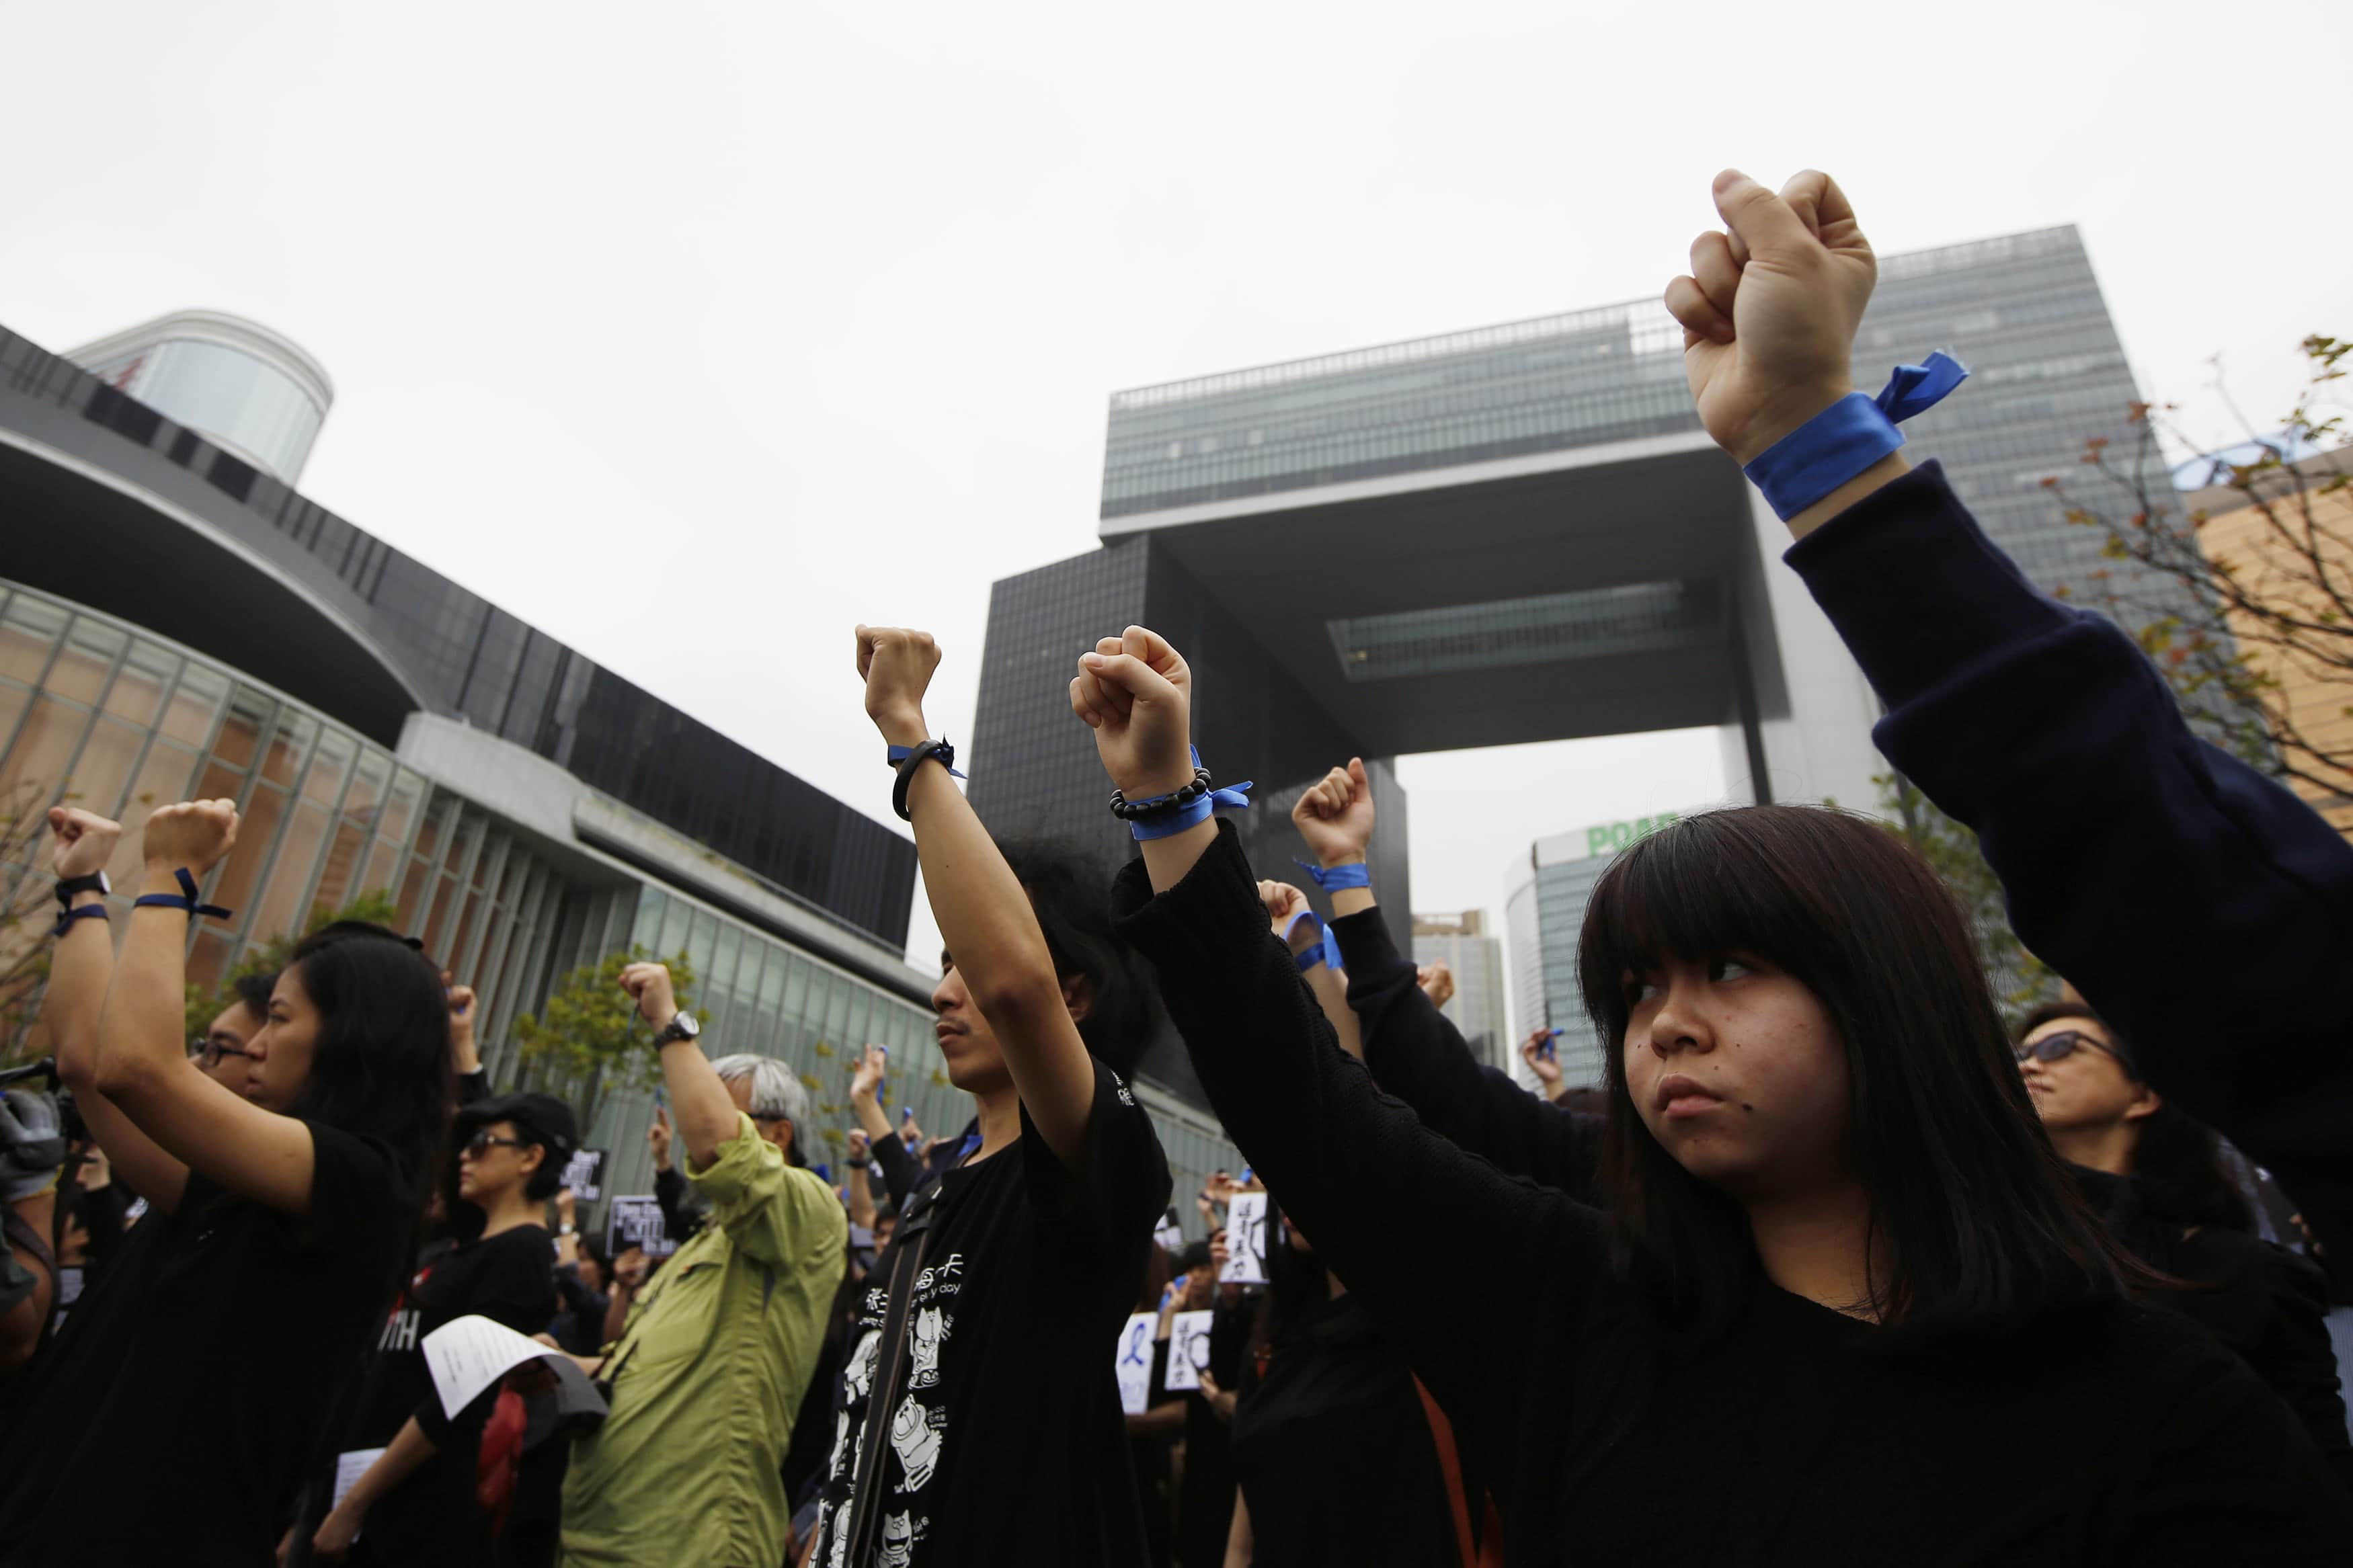 Protesters raise their fists with a blue ribbon during the "Standing in Silent Action" event in support of the Hong Kong Journalist Association (HKJA) at Tamar Park in Hong Kong, 2 March 2014, REUTERS/Tyrone Siu